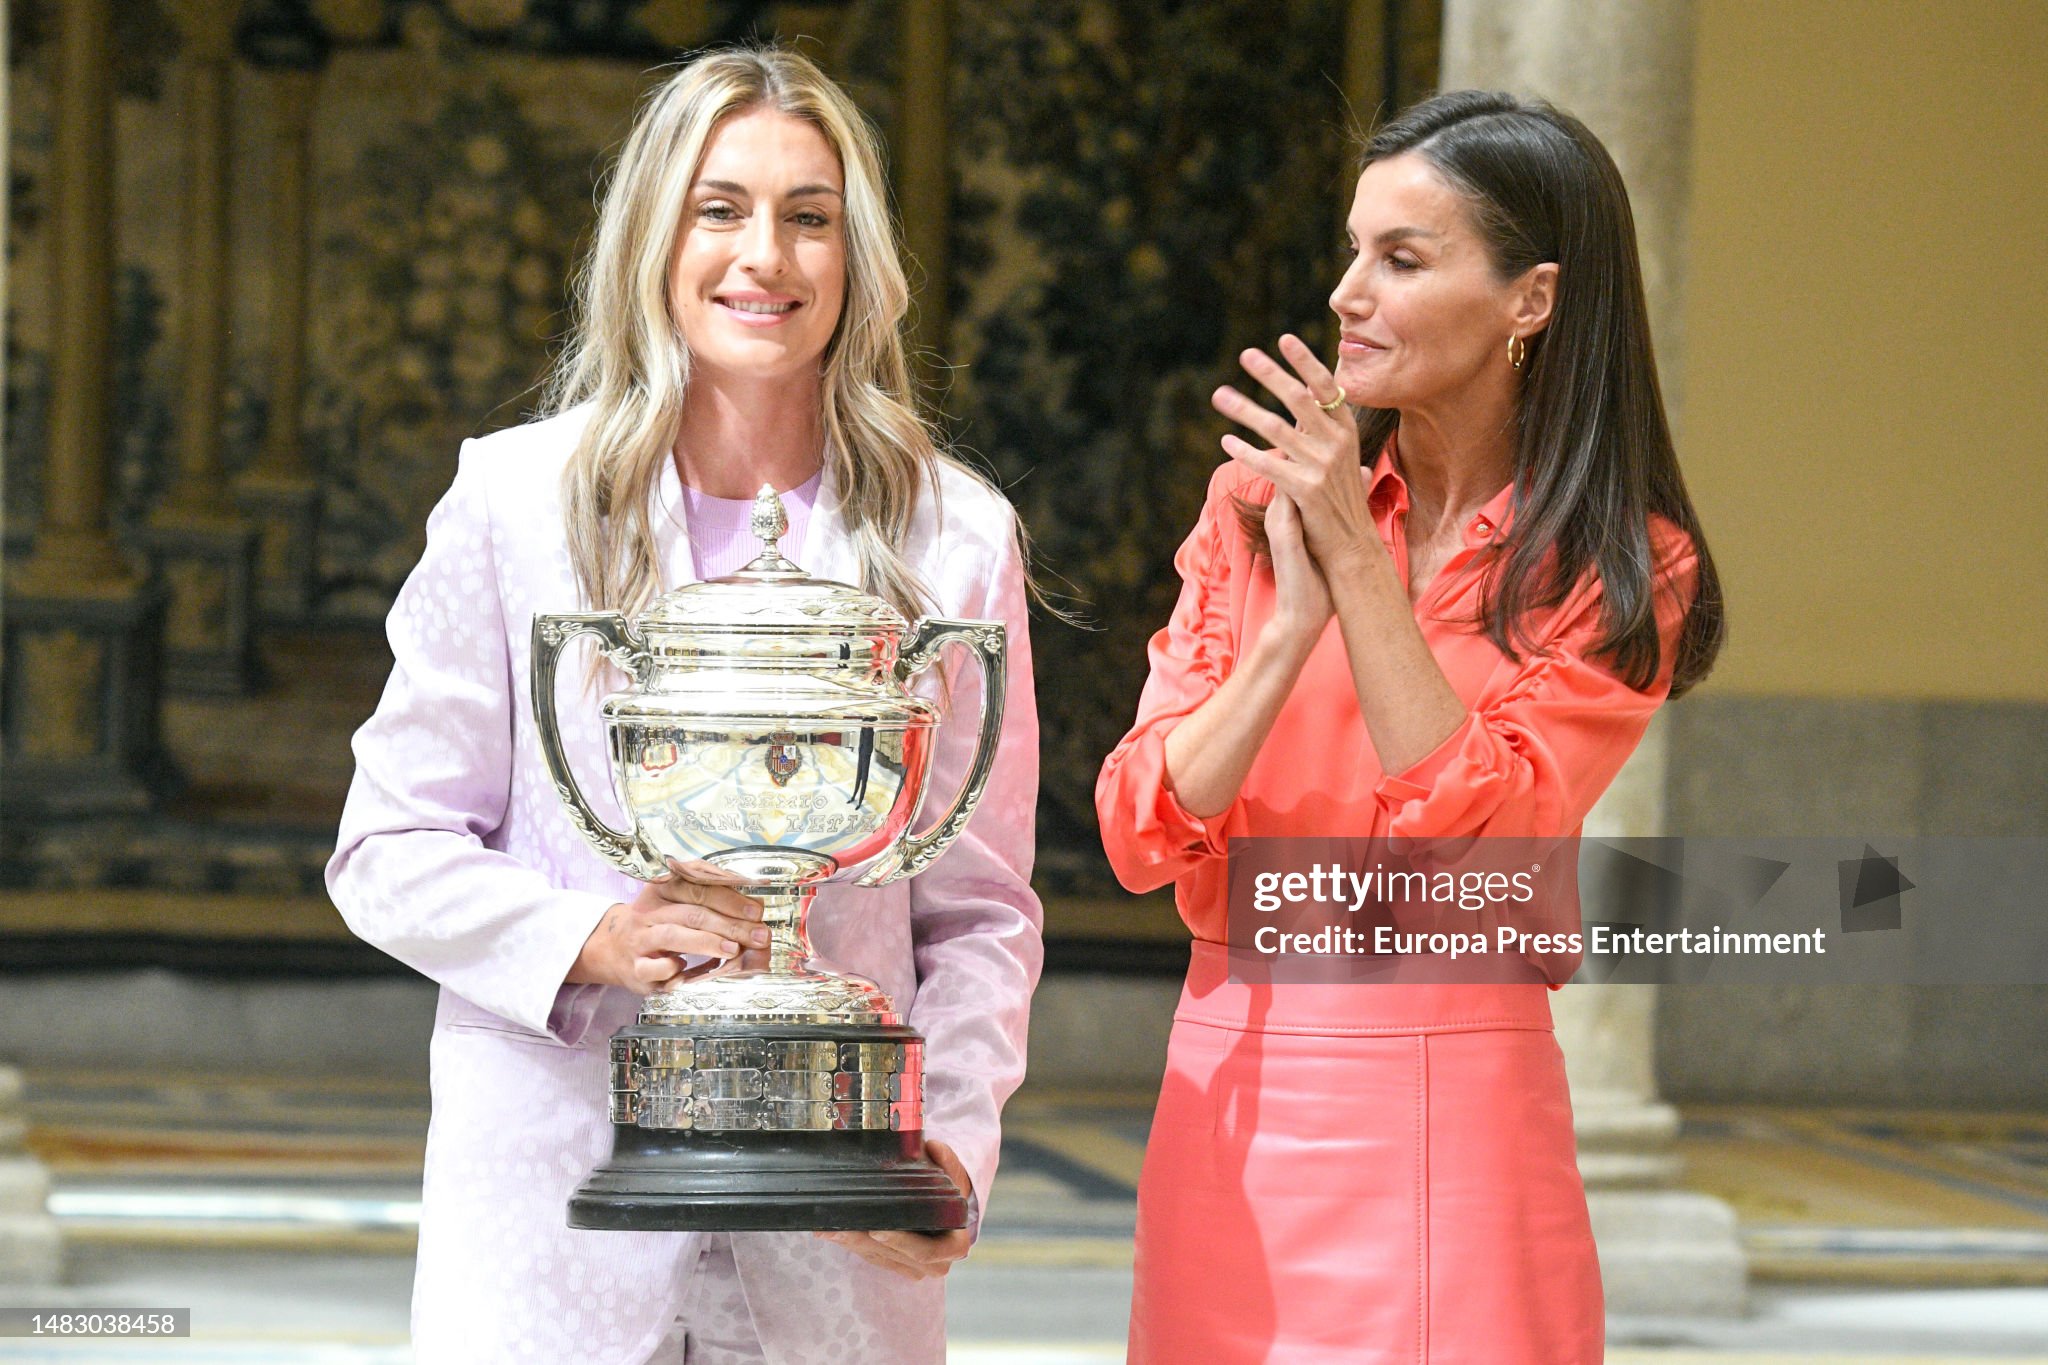 the-king-and-queen-of-spain-present-the-national-sports-awards.jpg